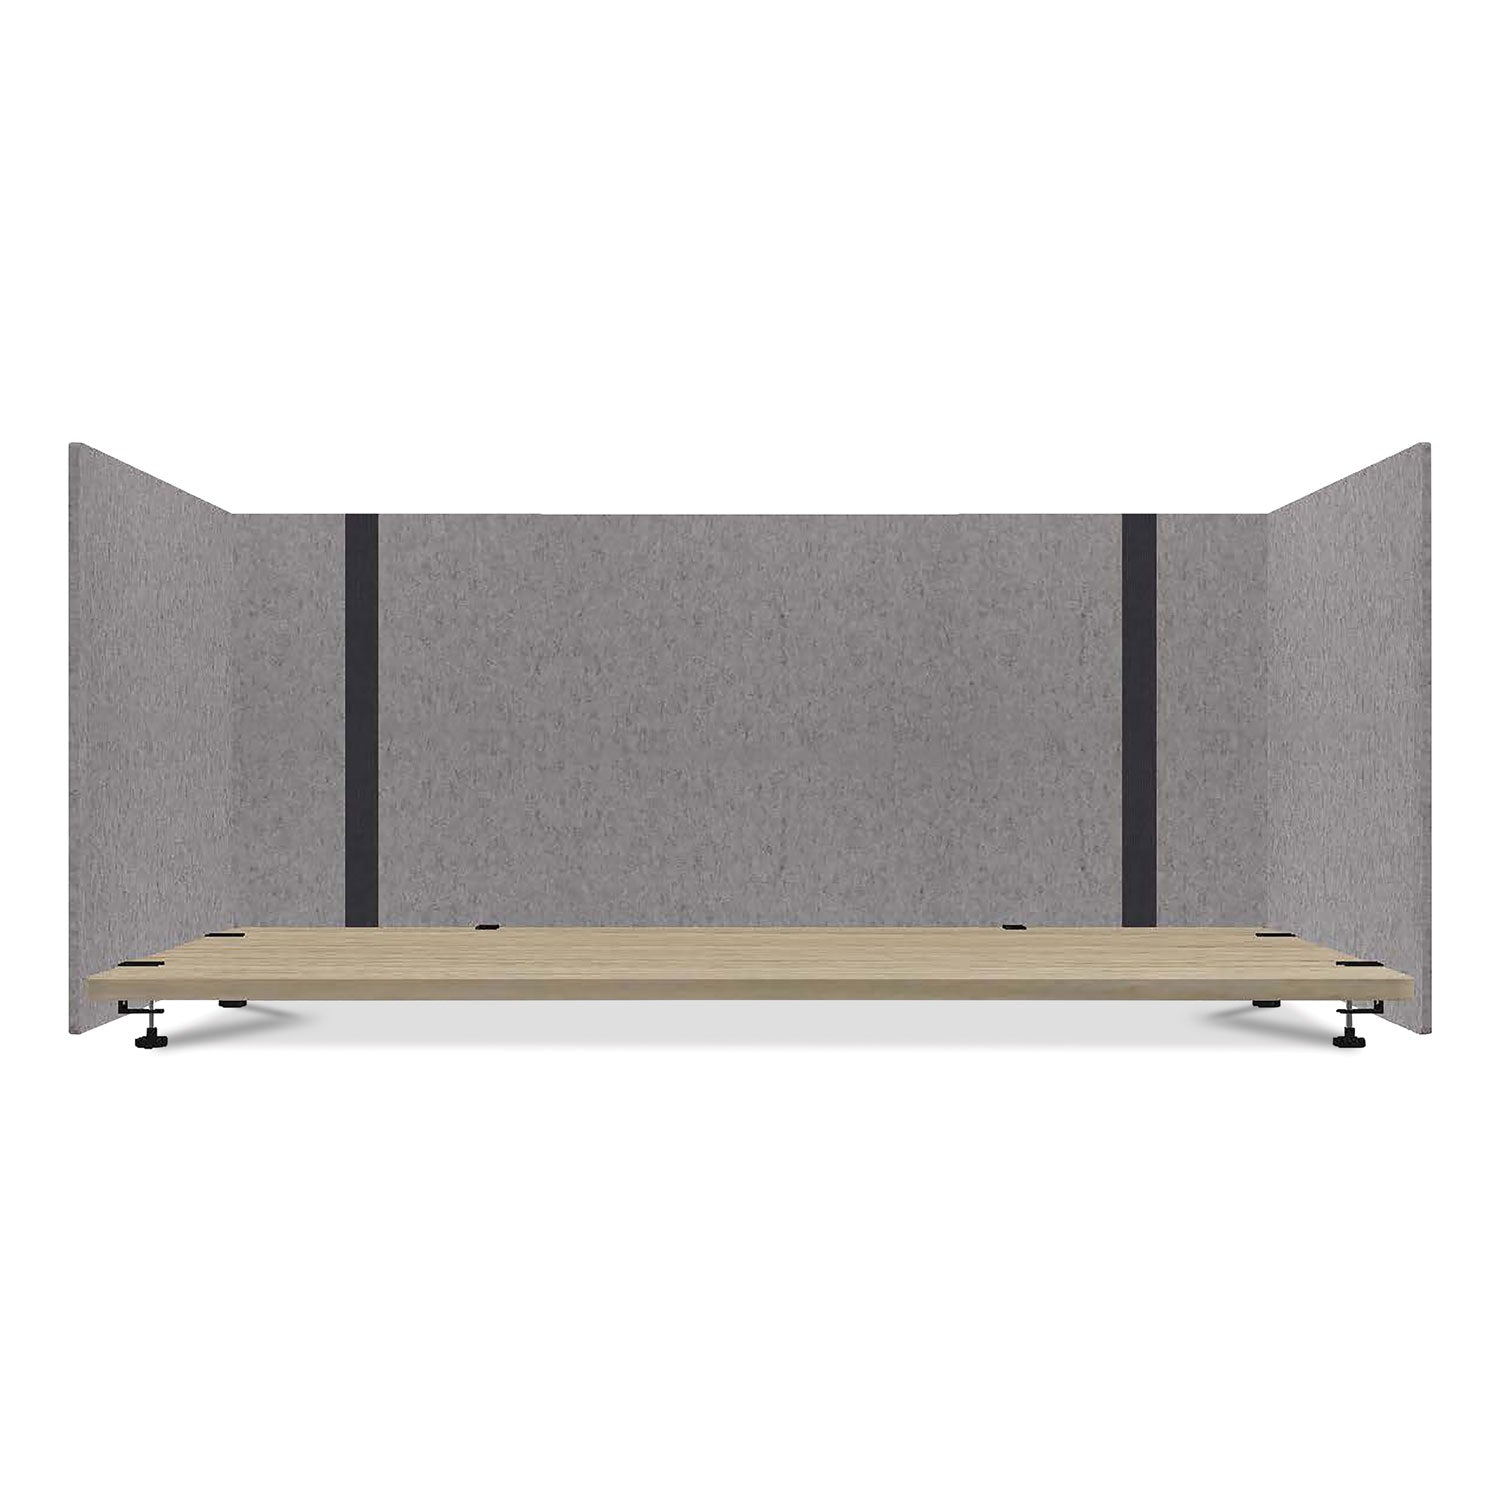 adjustable-desk-screen-with-returns-48-to-78-x-29-x-265-polyester-gray_gn1luad48301g - 1